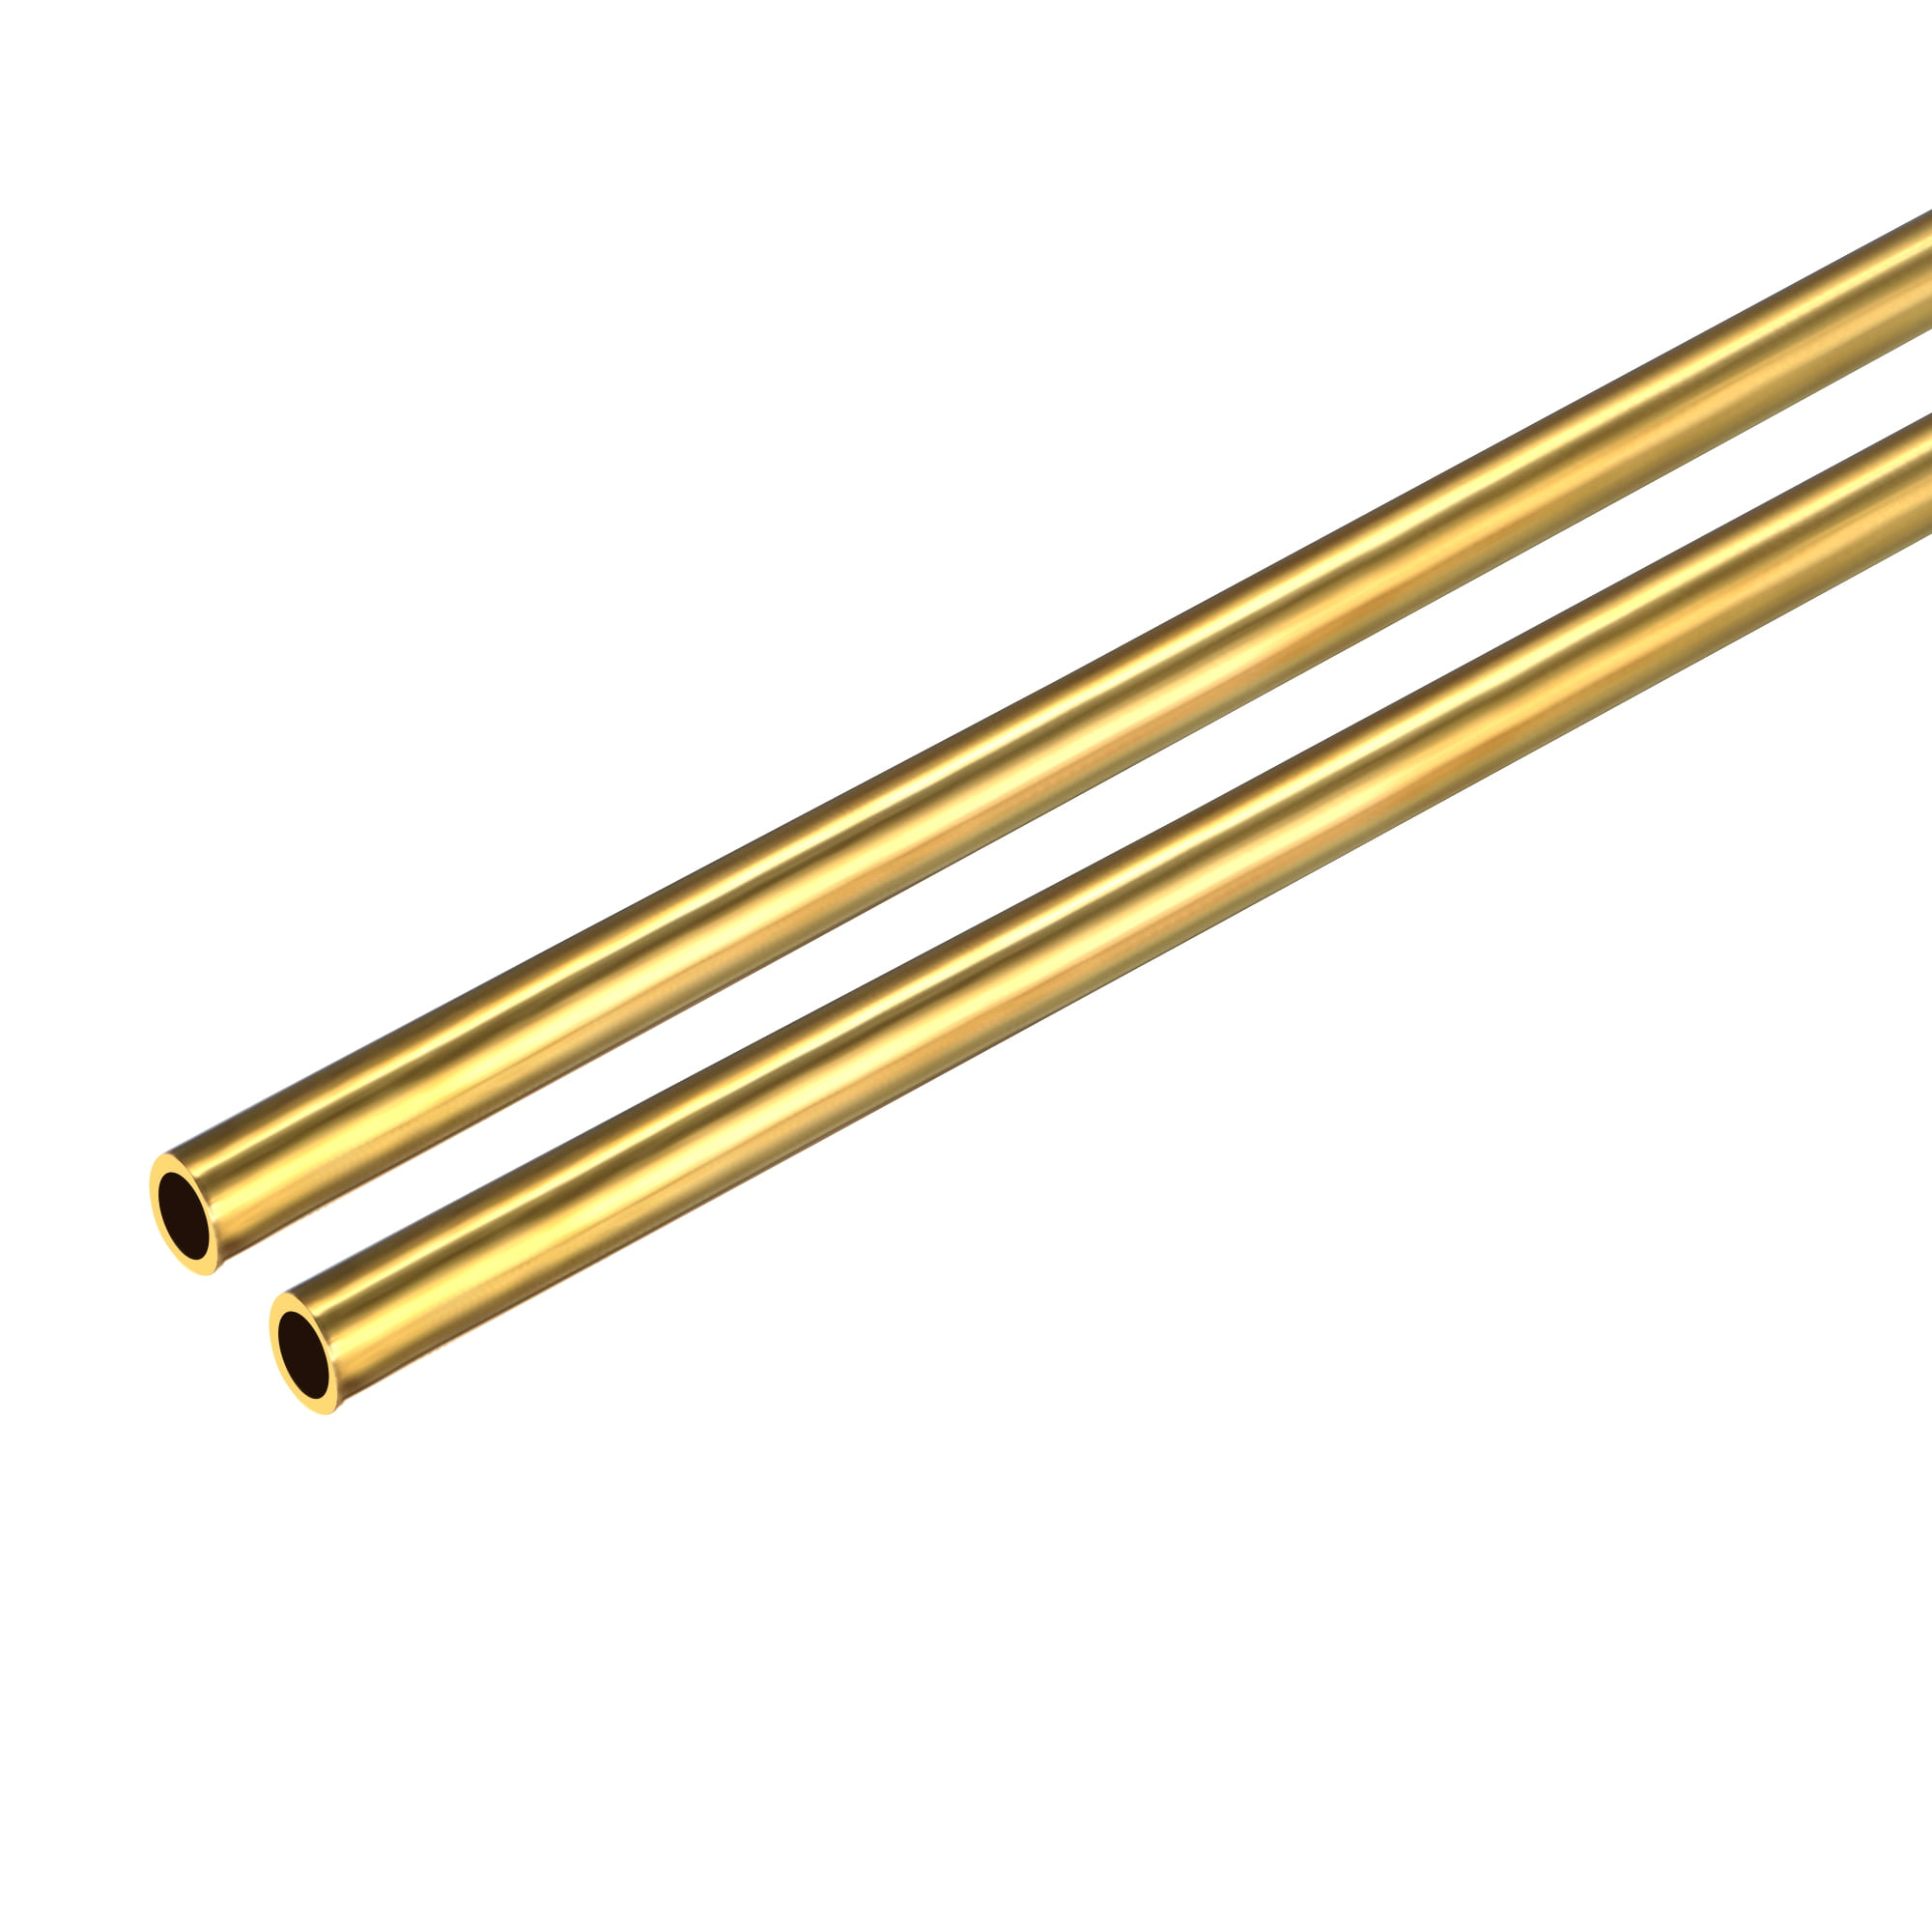 uxcell 0.3mm x 1mm x 500mm Brass Pipe Tube Round Bar Rod for RC Boat 